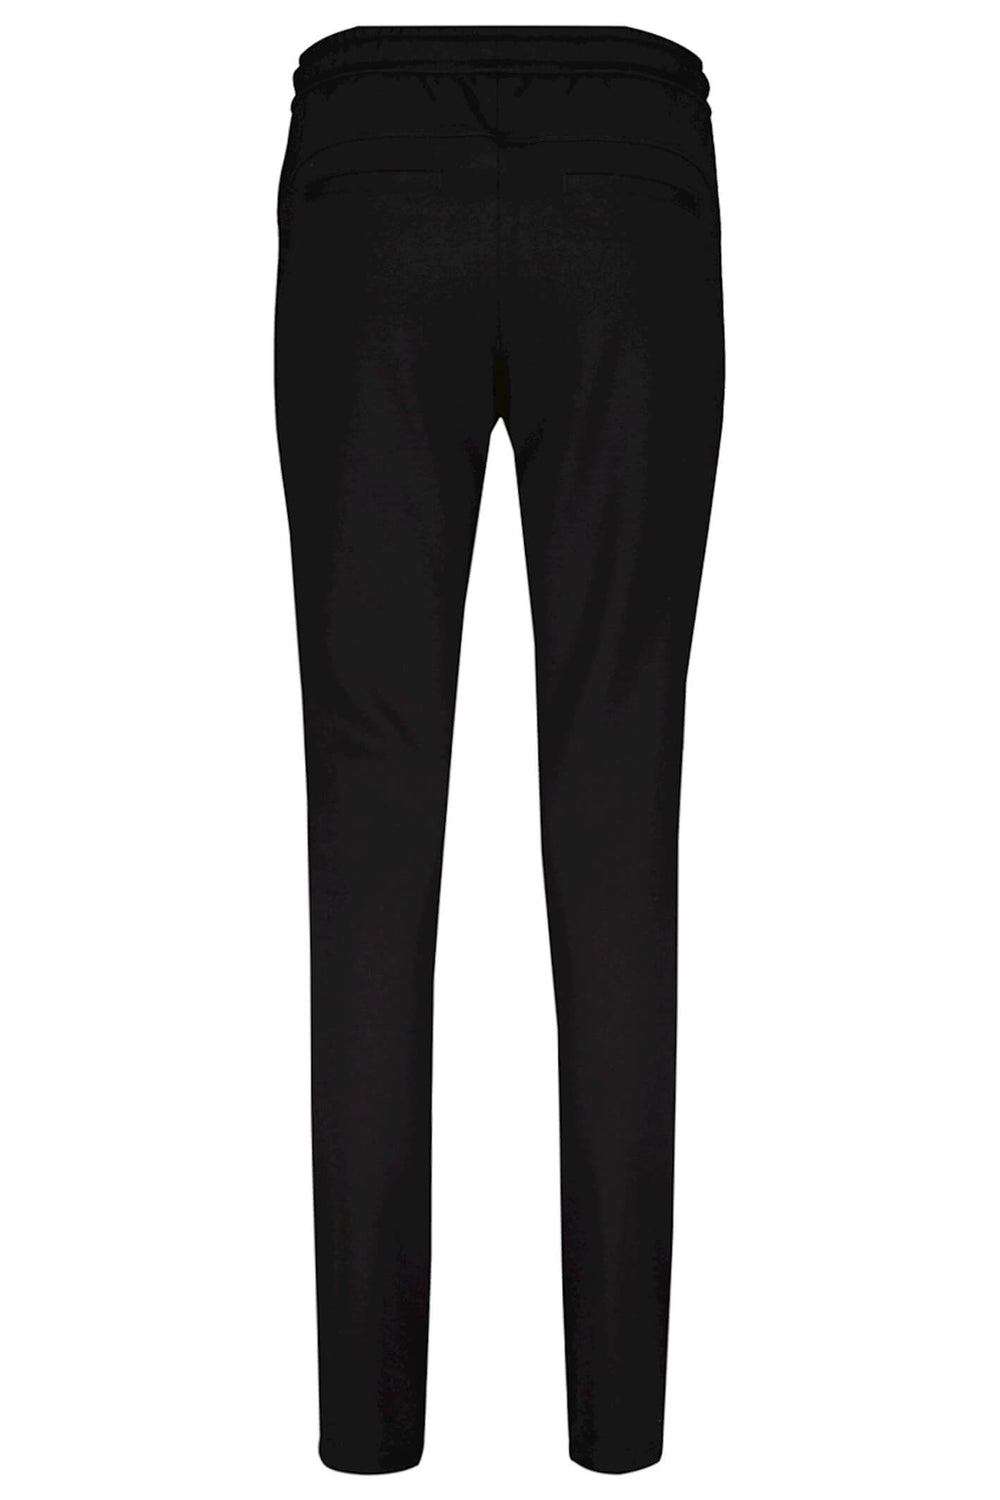 Red Button SRB4127 Tessy Punta Black Drawstring Waist Pull-On Trousers - Dotique